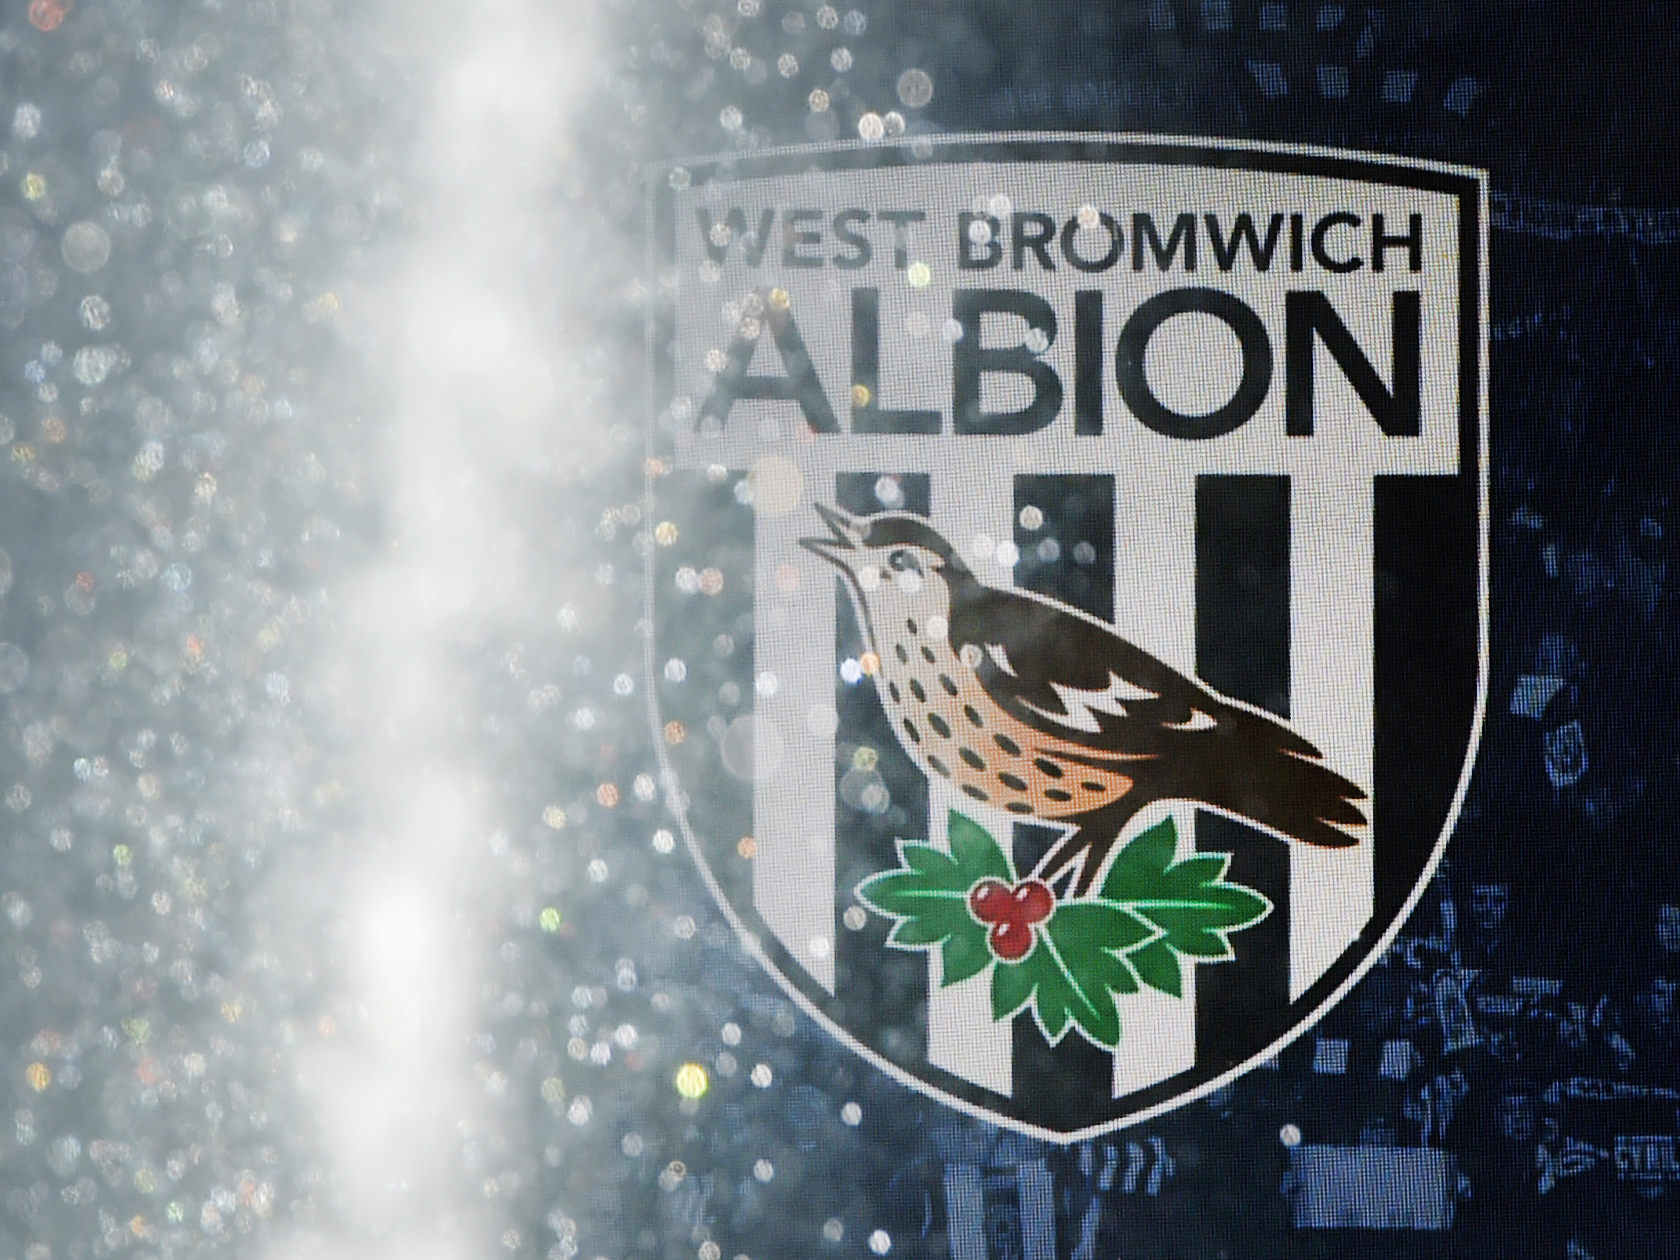 Water from the sprinkler with an Albion badge in the background